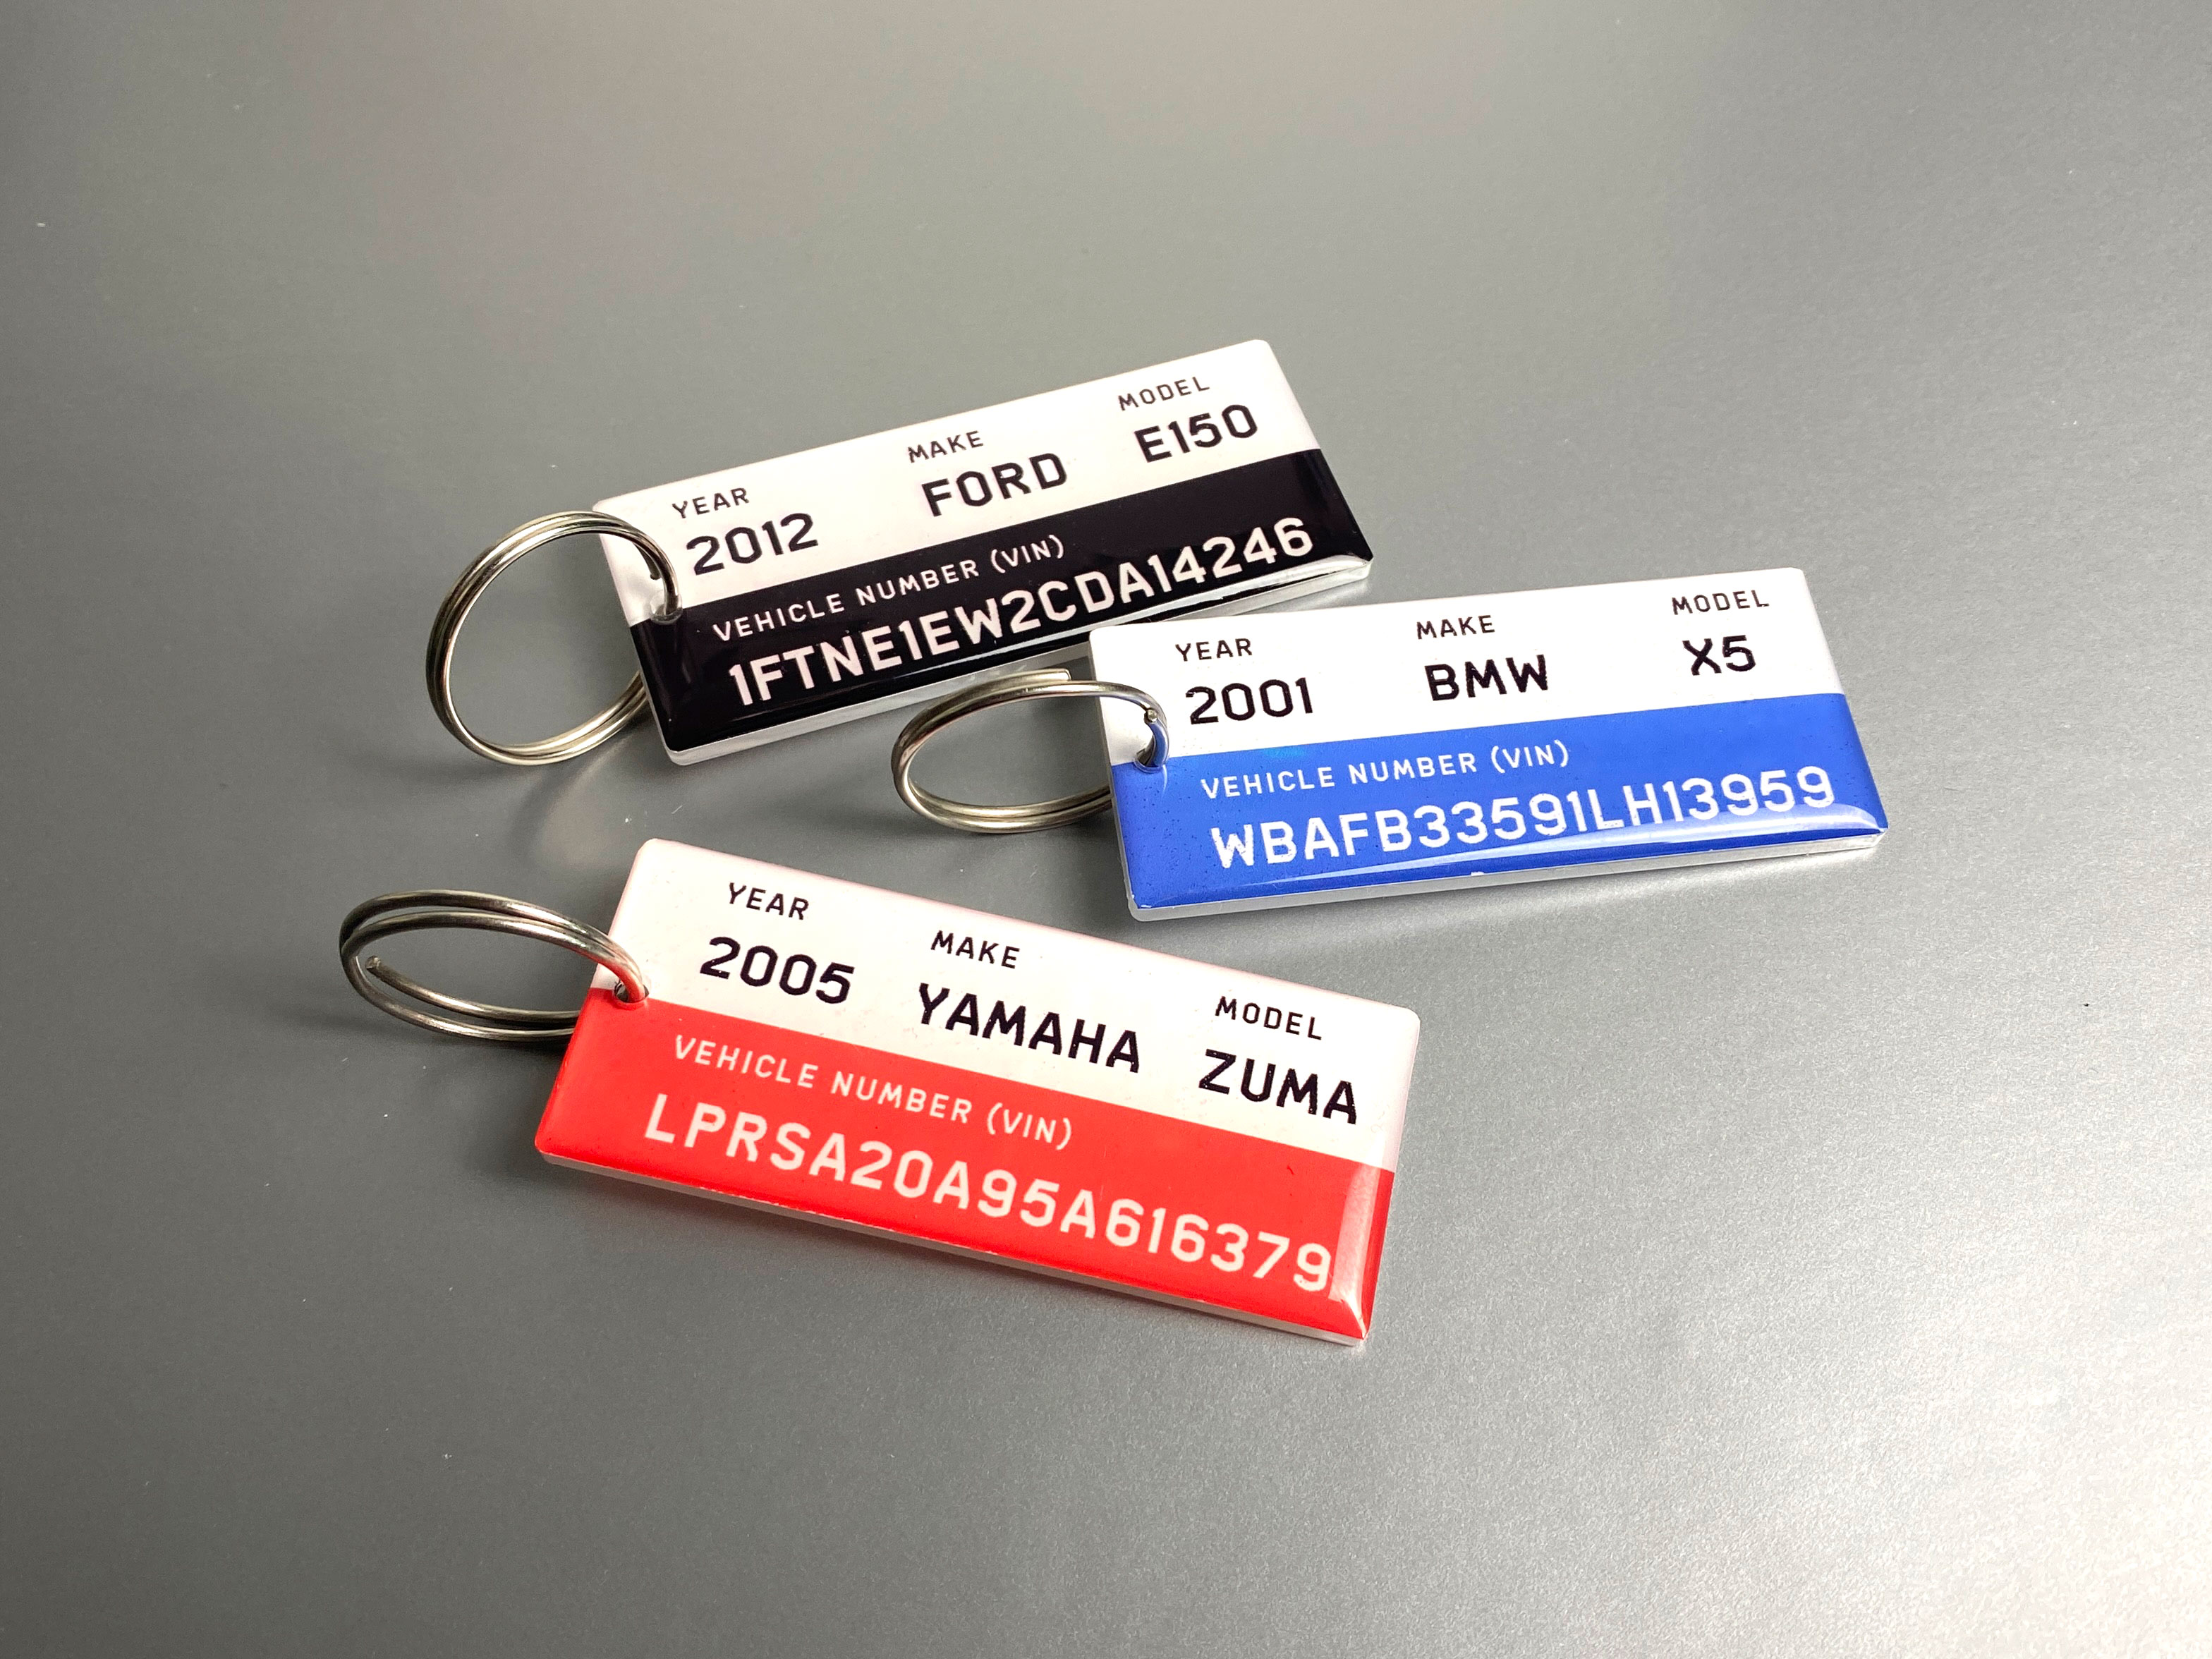 Key ring for car enthusiasts, dealerships, commercial fleet. Key ring matches your vehicle color, has vehicle identification number (vin), manufacturing year, make and model.